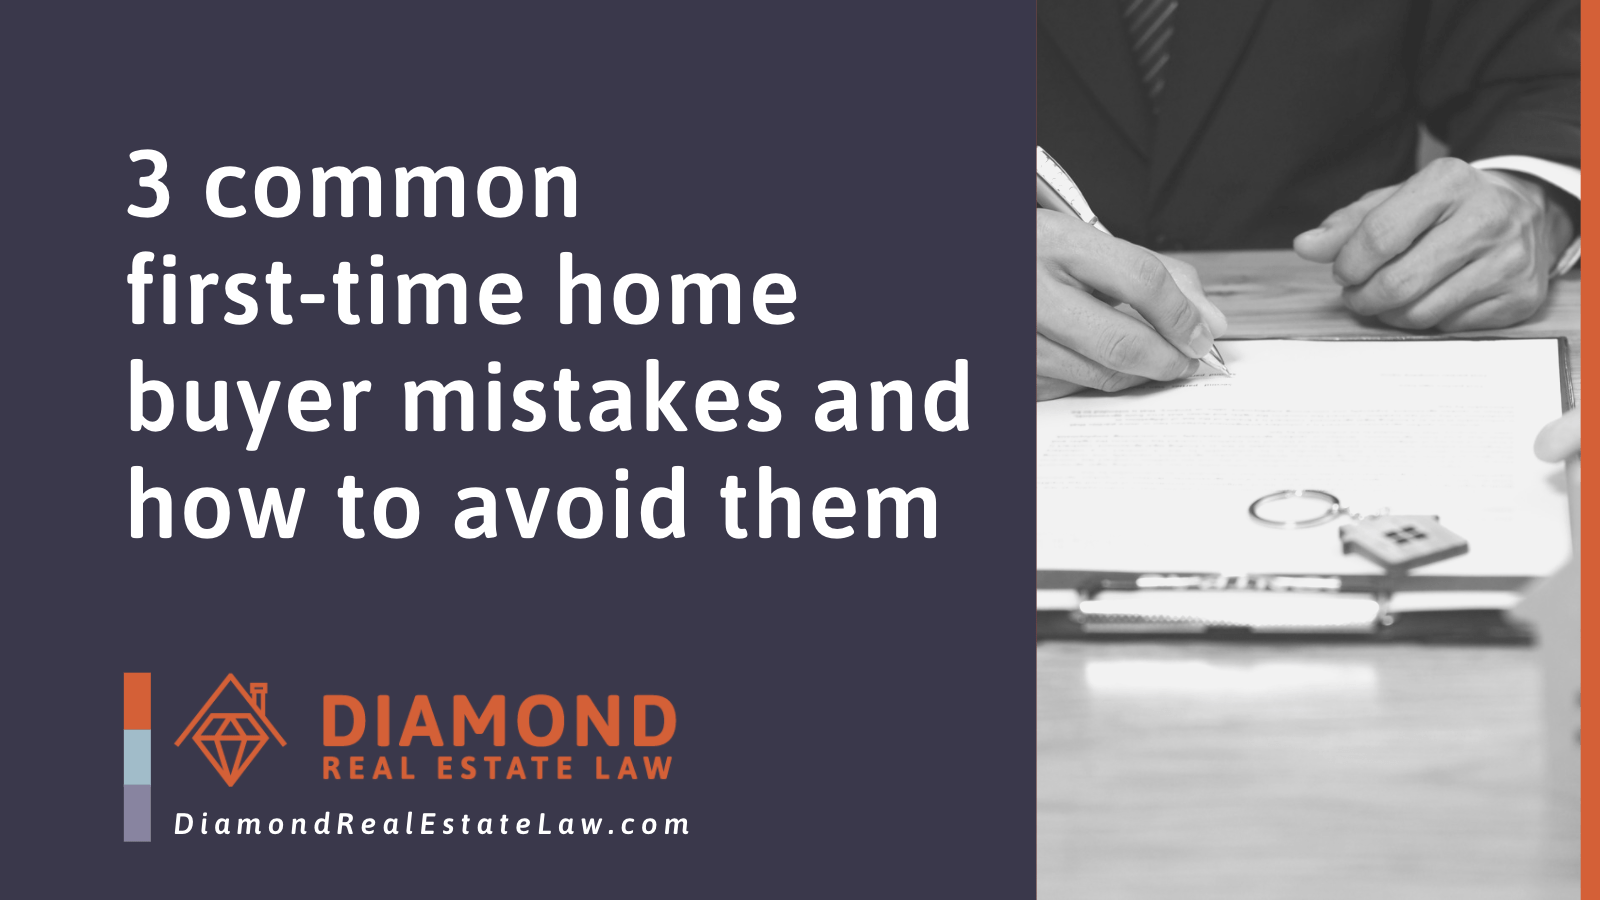 first-time home buyer mistakes Illinois - Diamond Real Estate Law | McHenry, IL Residential Real Estate Lawyer